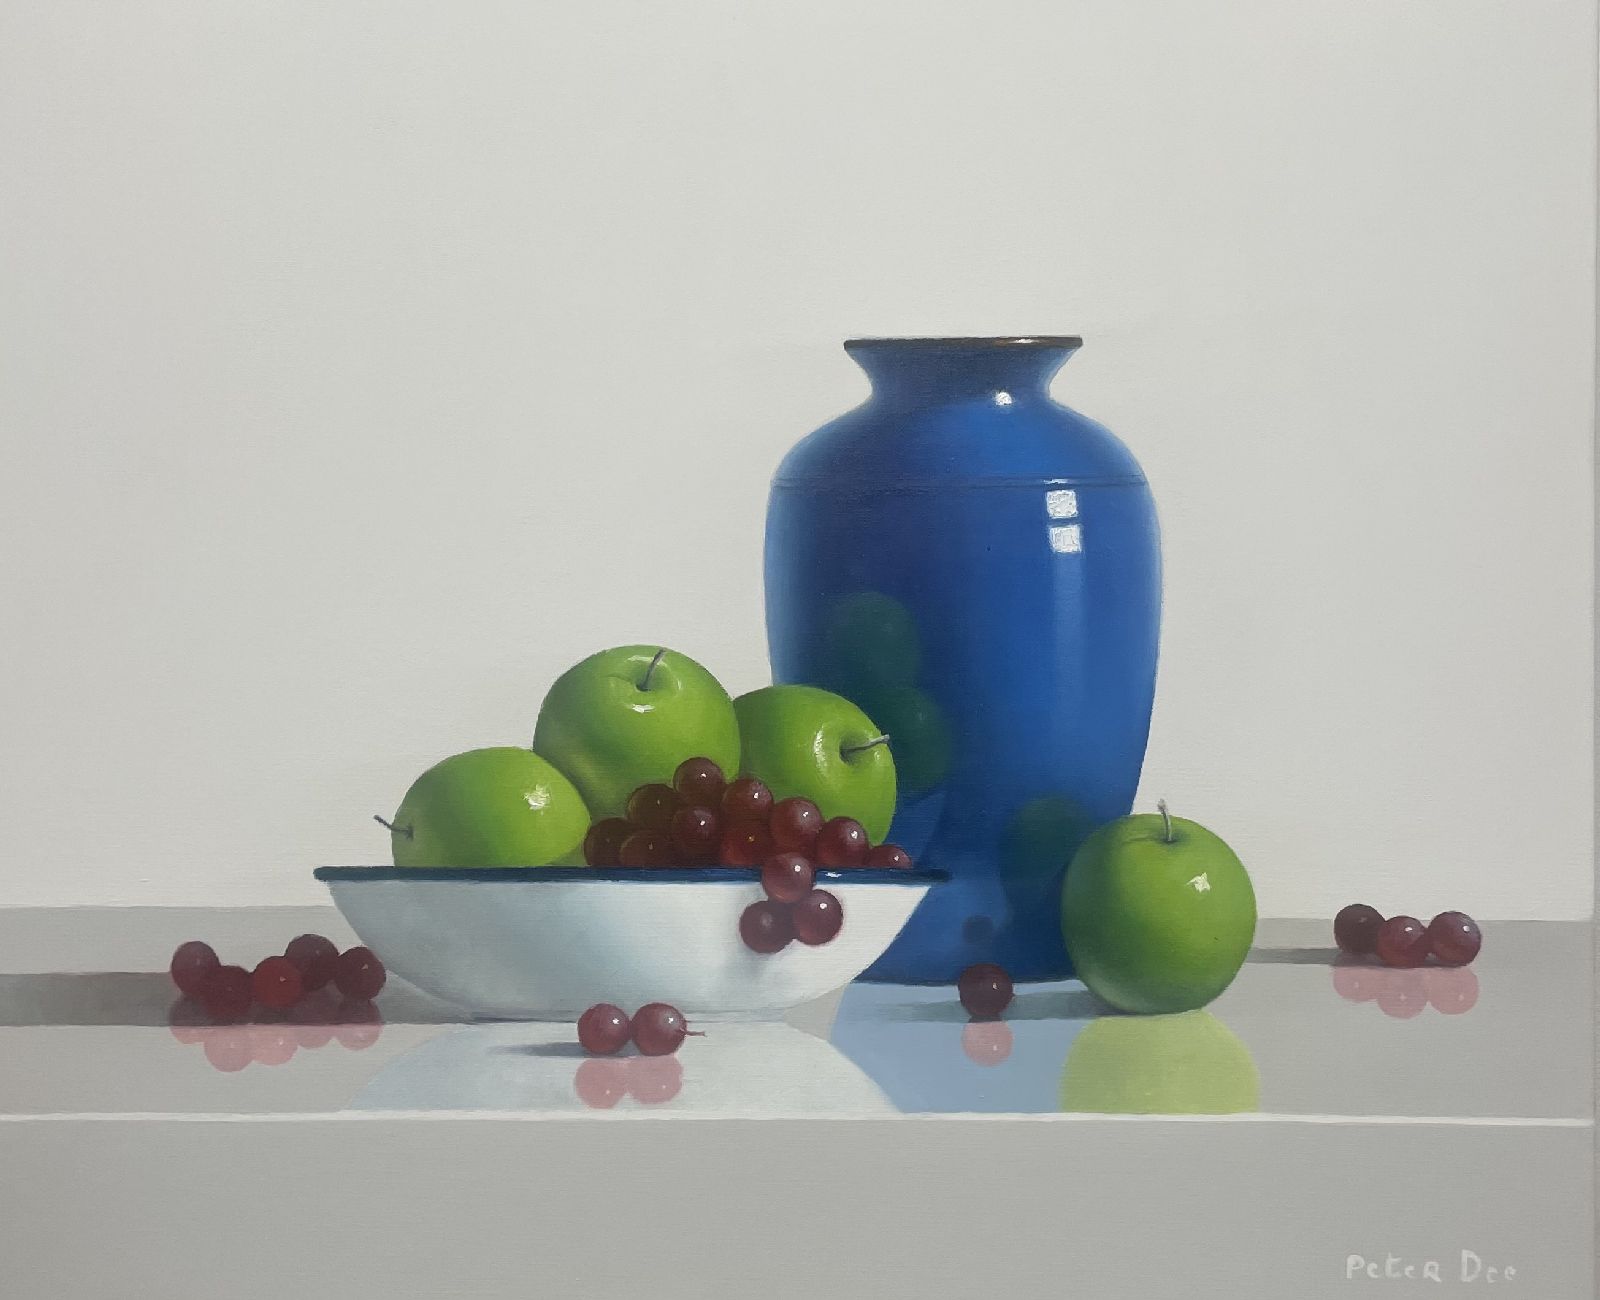 Peter Dee - Blue Vase and White Bowl with Apples and Grapes